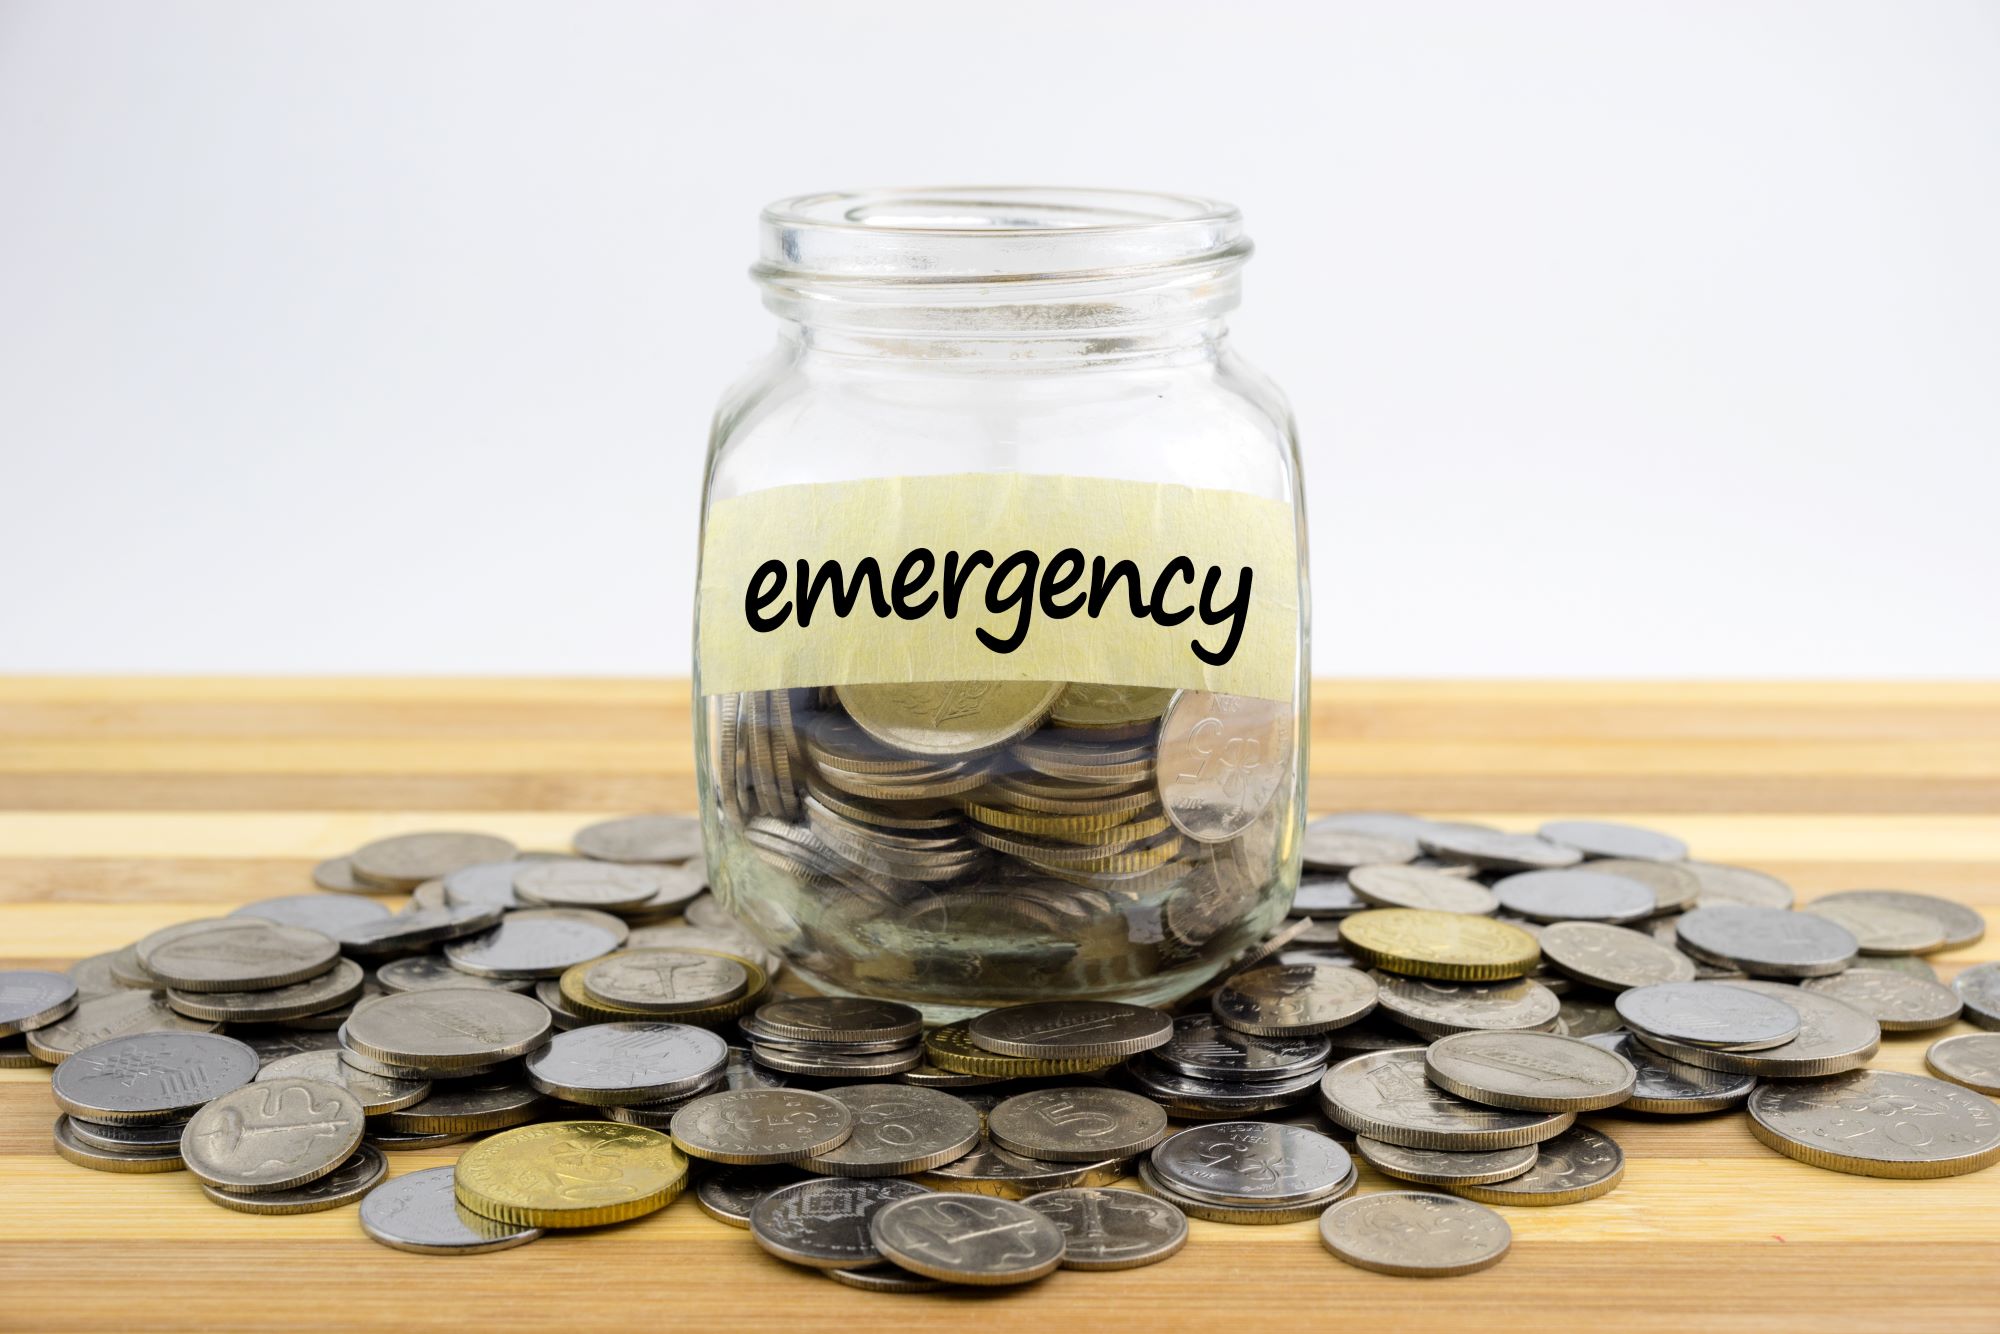 A glass jar on the table with coins and emergency label for emergency fund